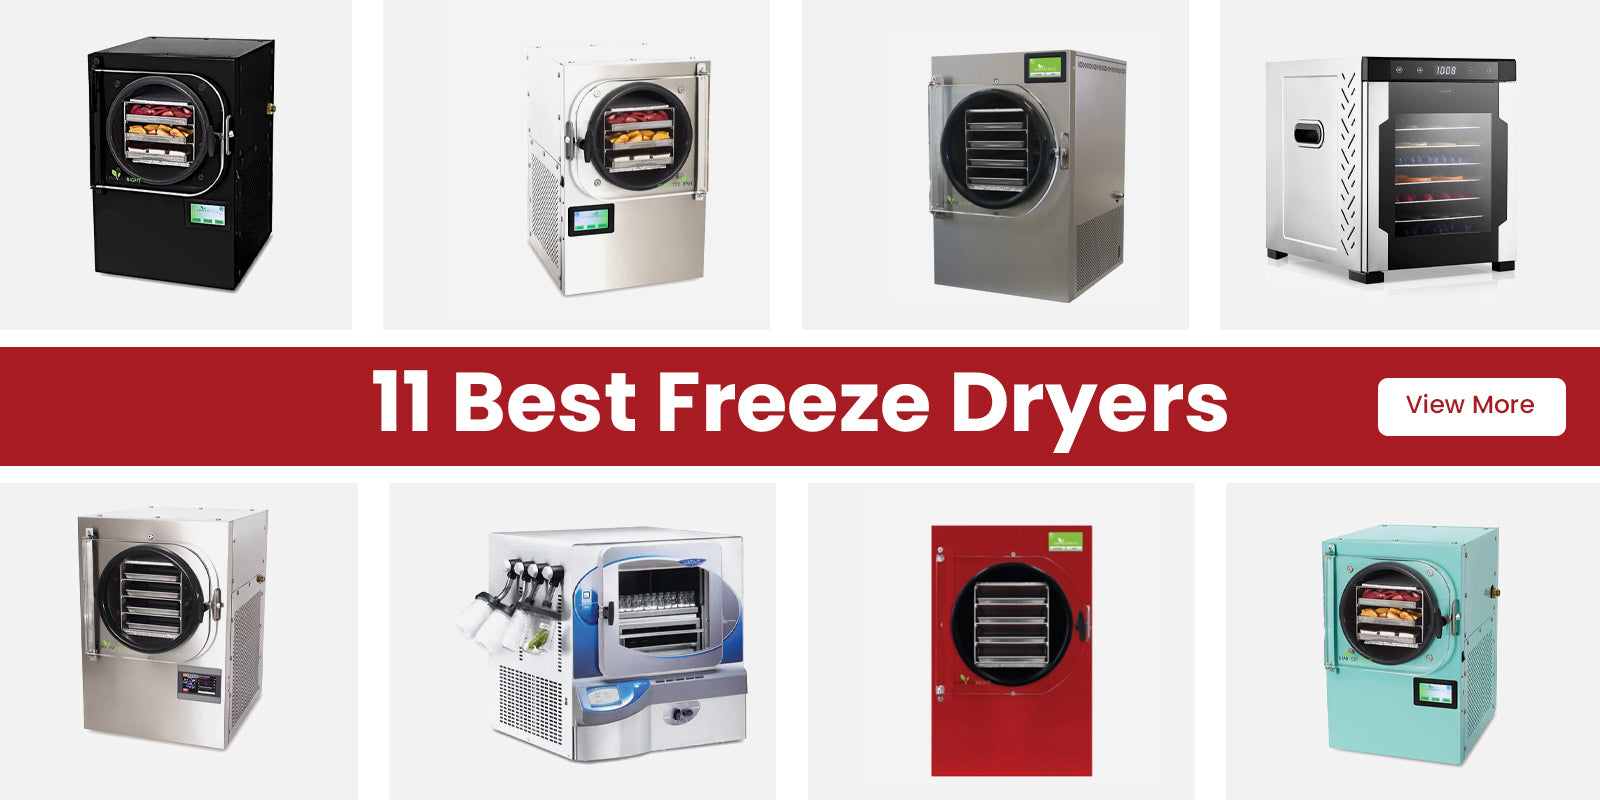 Freeze Dryers for Sale - Top Models & Best Prices